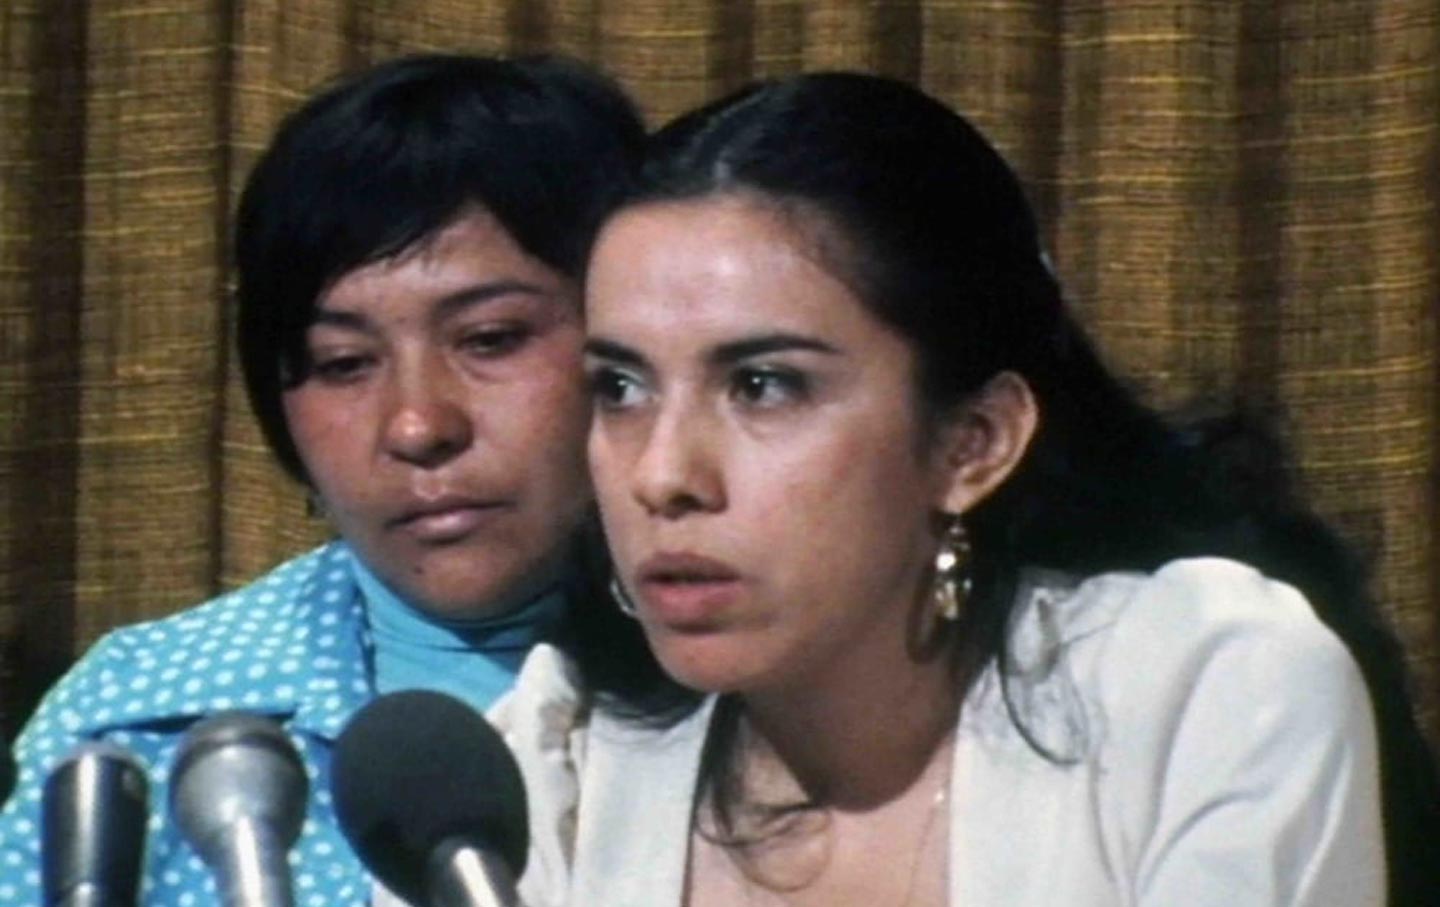 A Group of Mexican Immigrant Women Were Sterilized Without Their Consent. Can a New Film Bring Justice?